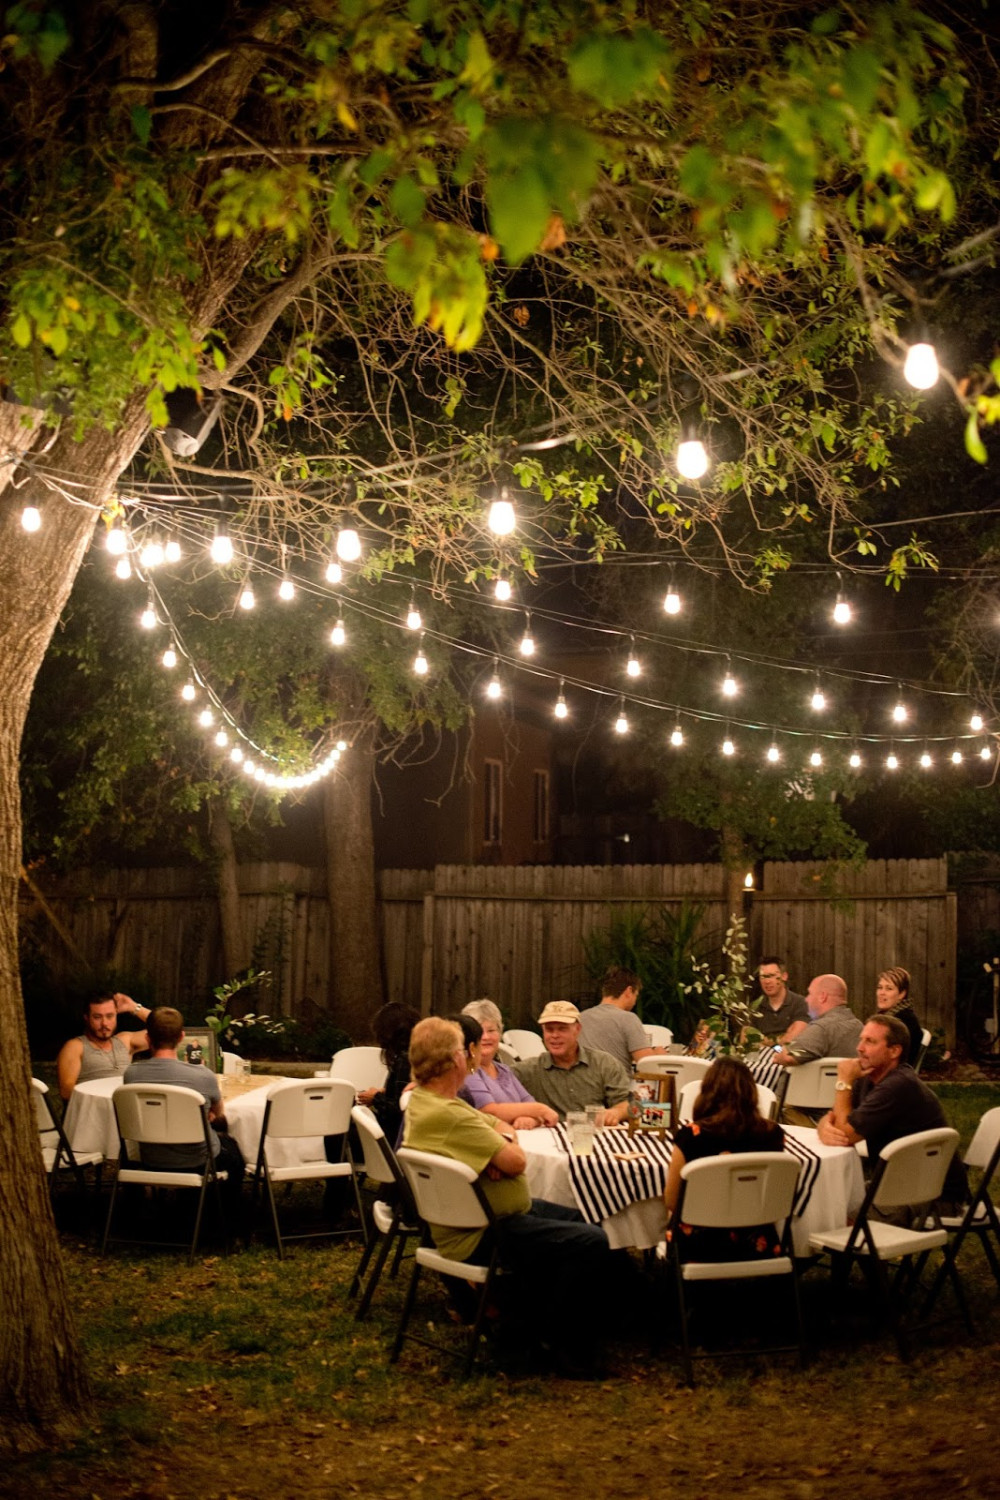 Domestic Fashionista: Backyard Birthday Party: For the Guy in Your